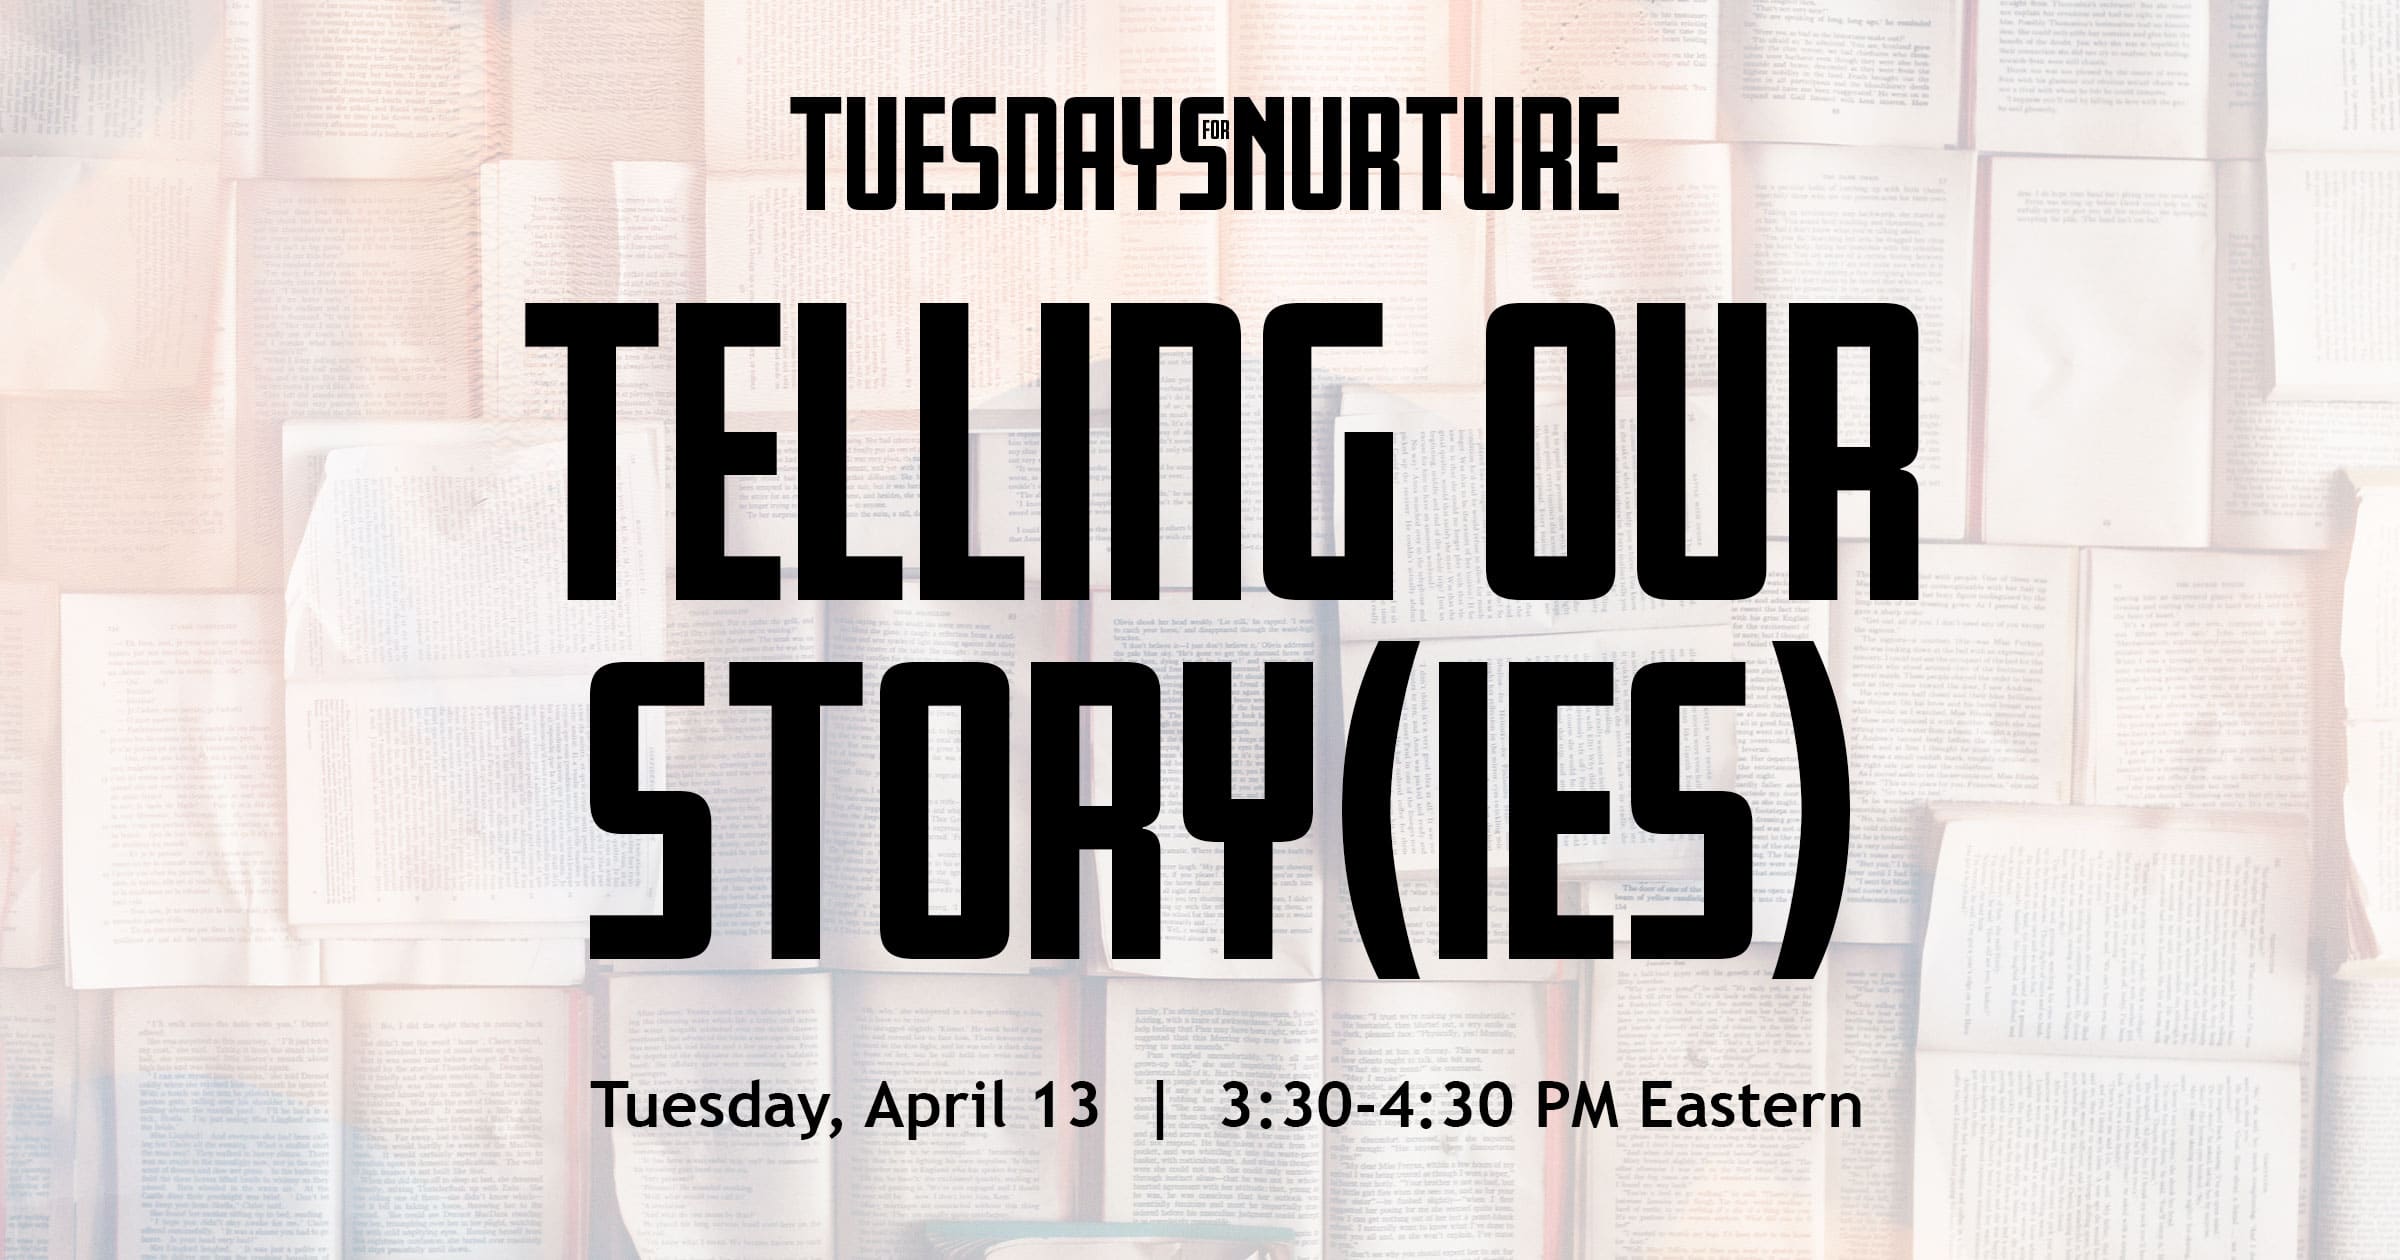 Tuesdays for Nurture: Telling Our Story(ies). Tuesday, April 13. 3:30 - 4:30 PM Eastern.